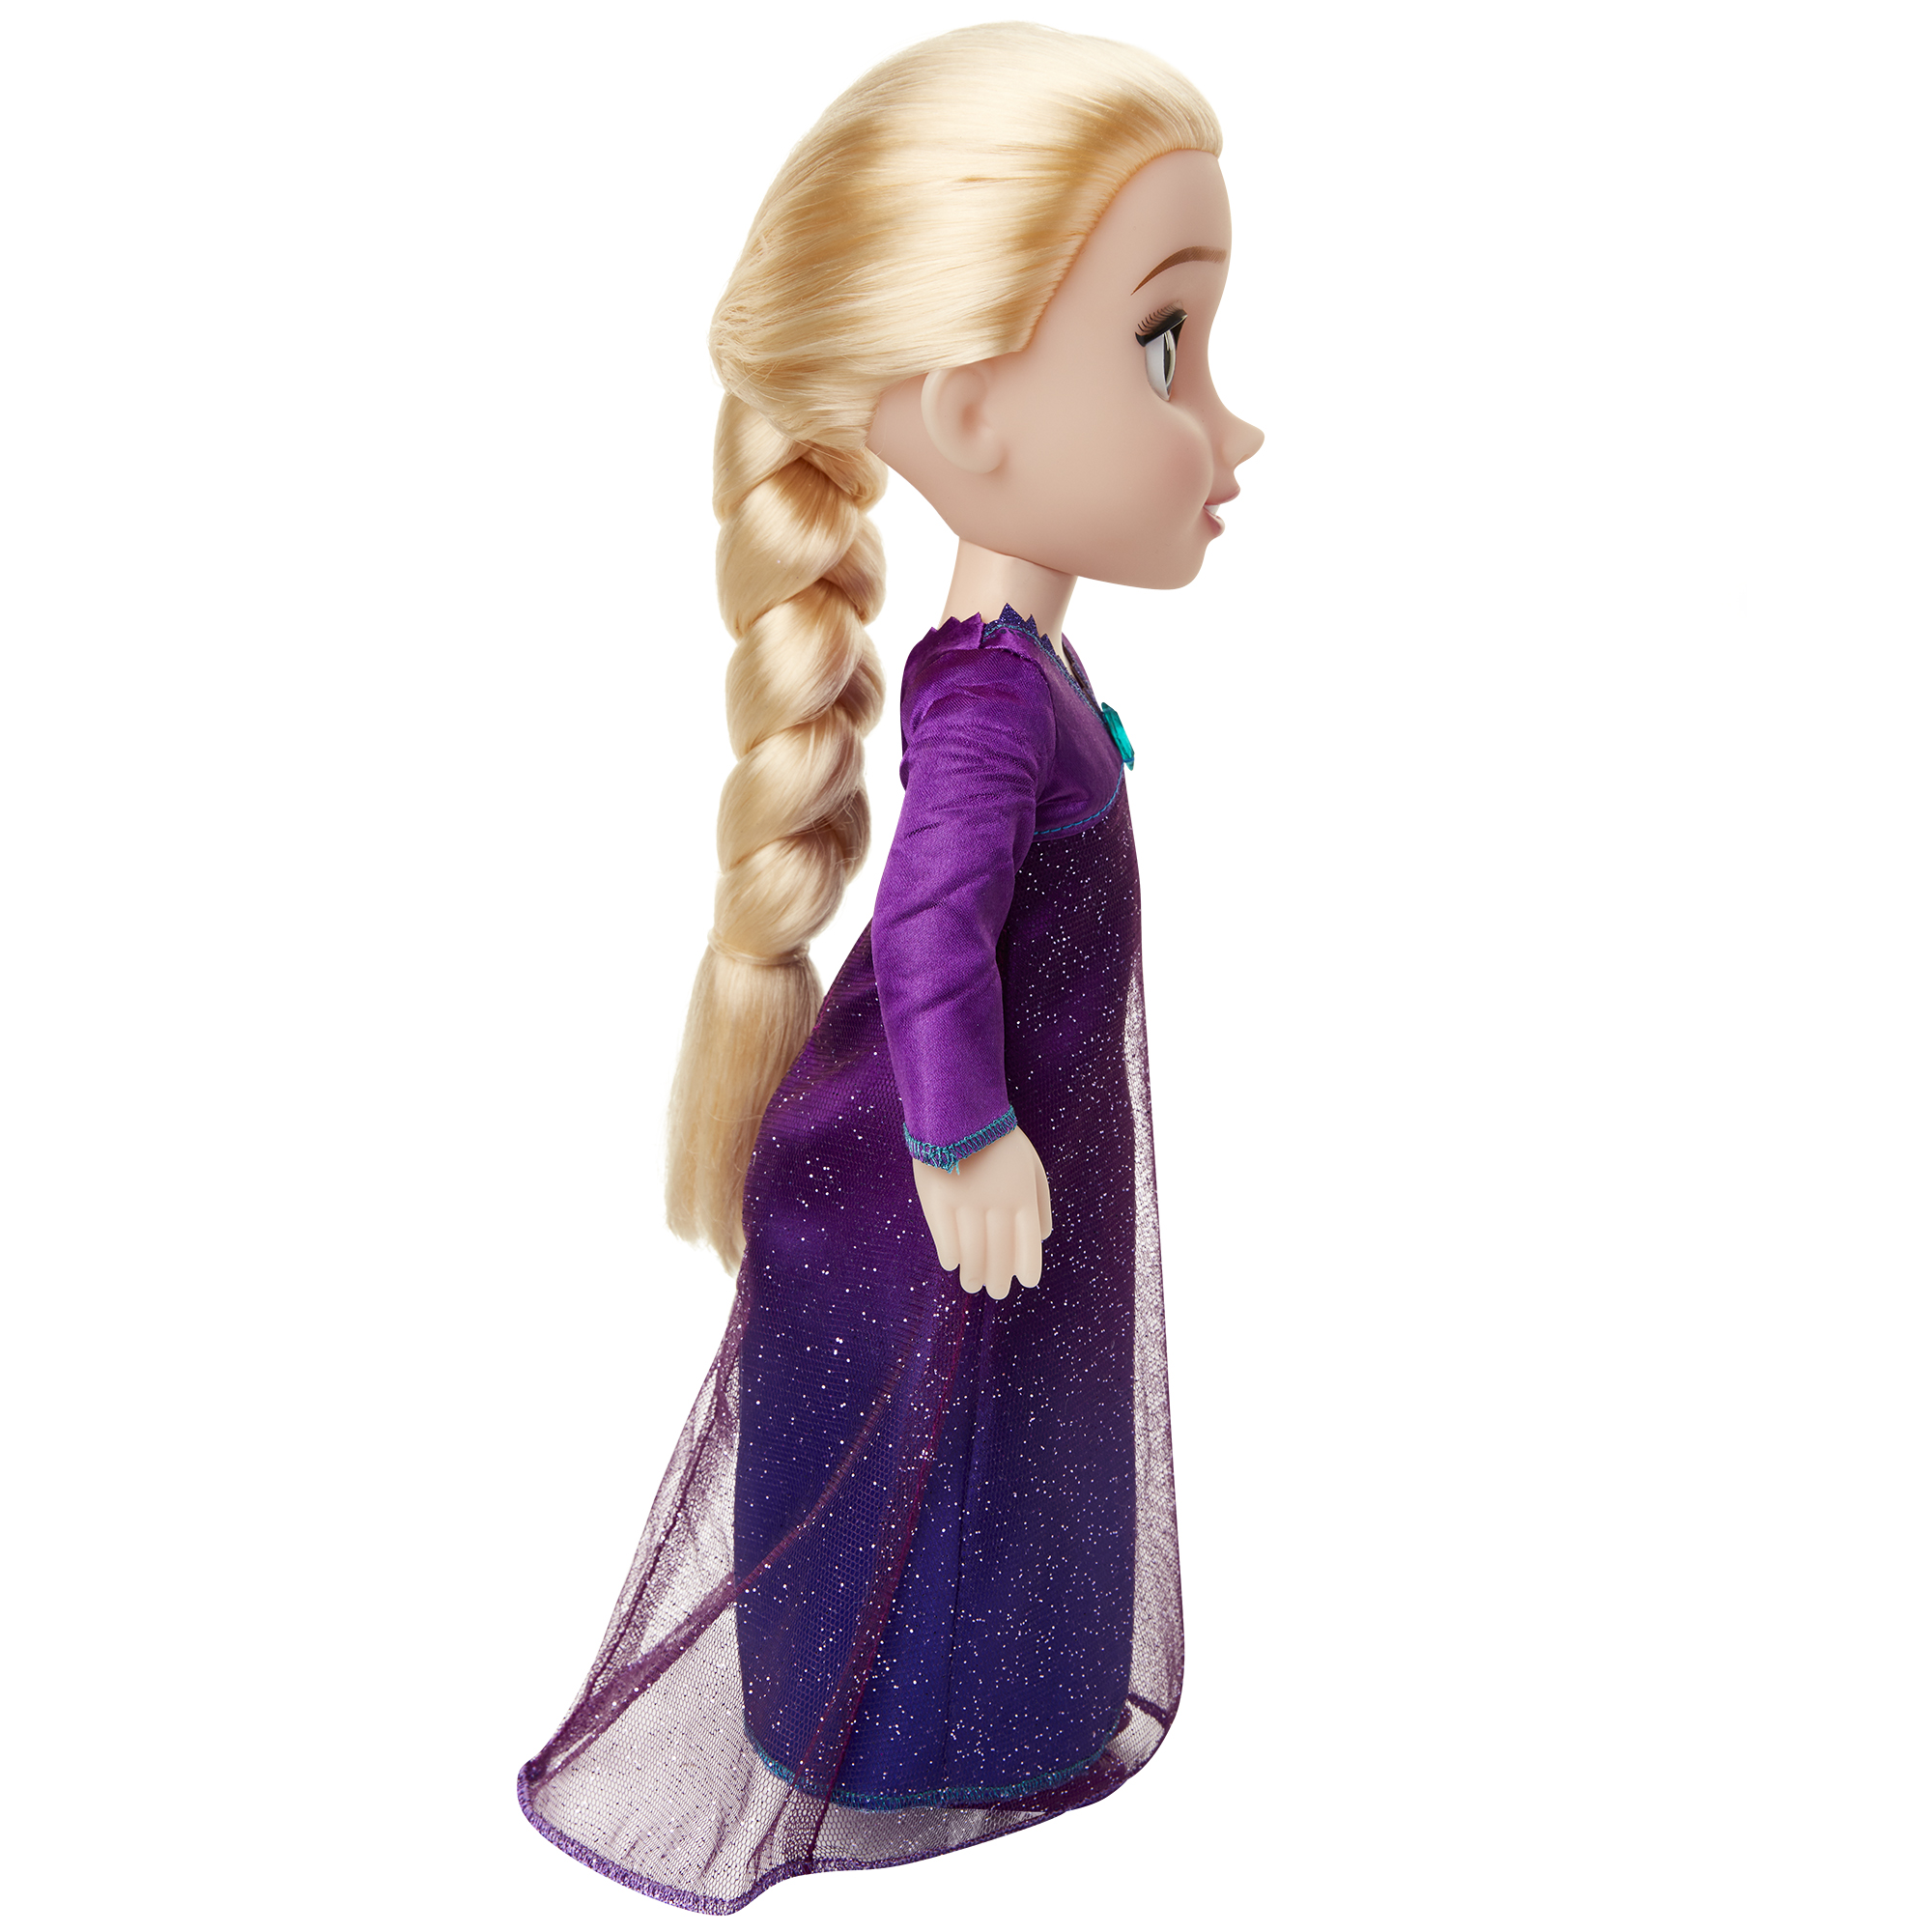 Disney Frozen 207031-V1 2 Elsa Musical Doll Sings Into the Unknown, Features 14 Film Phrases, 14" - image 5 of 10